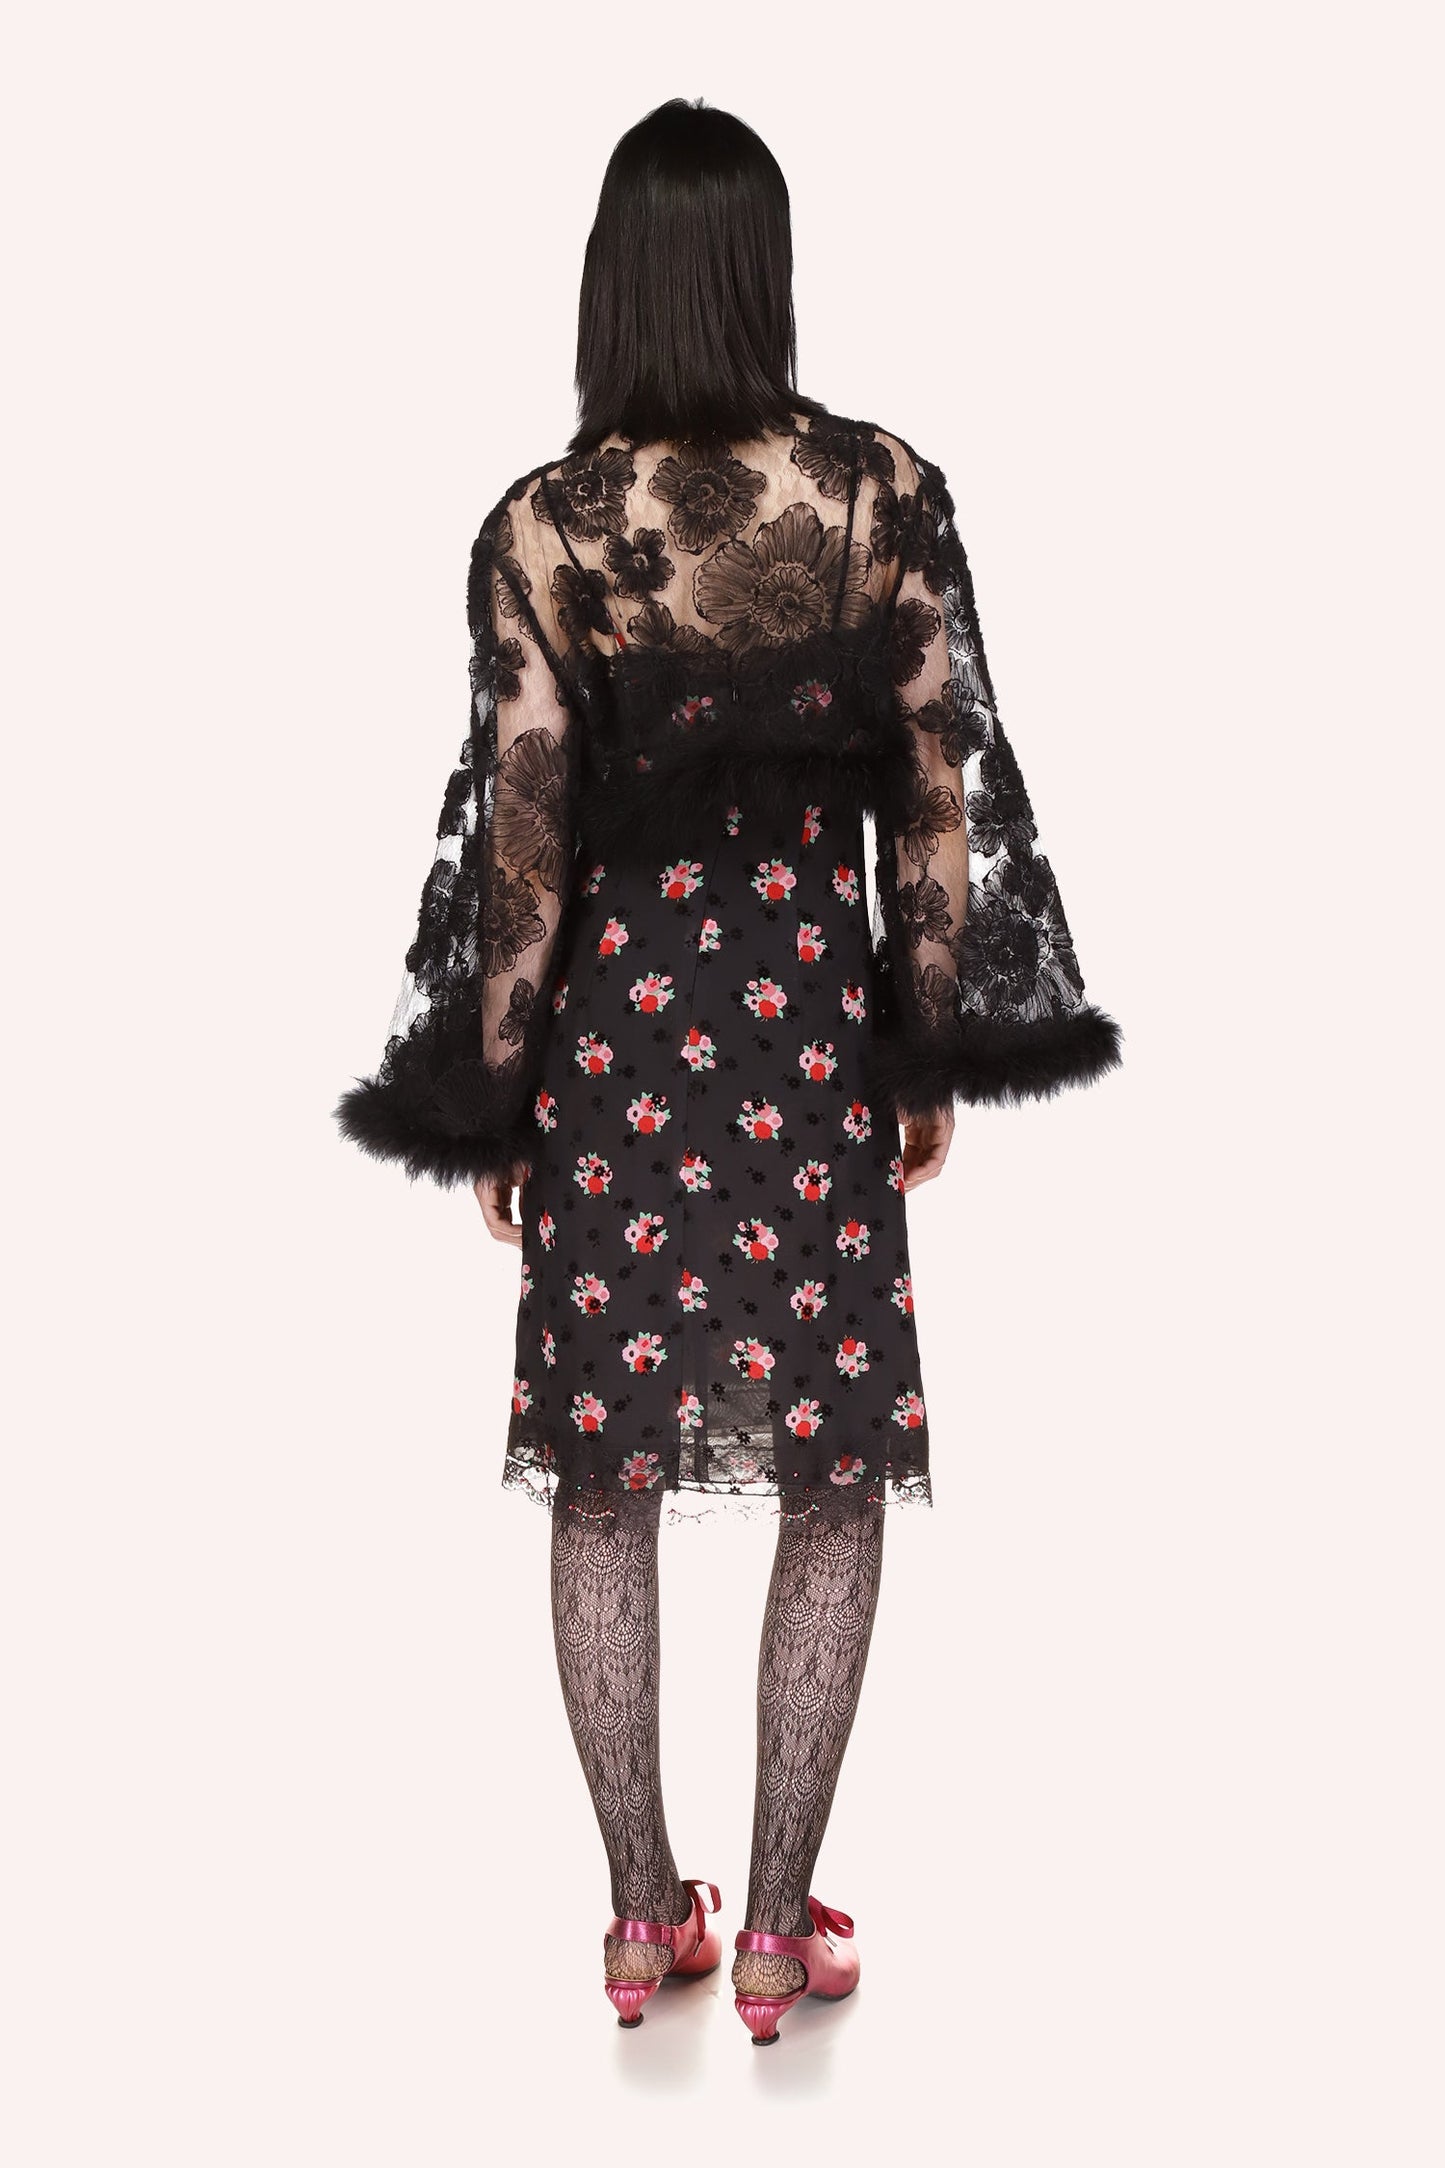 Stunning 3D Floral Tulle Bed Jacket in black, featuring large black flowers, sheer fabric